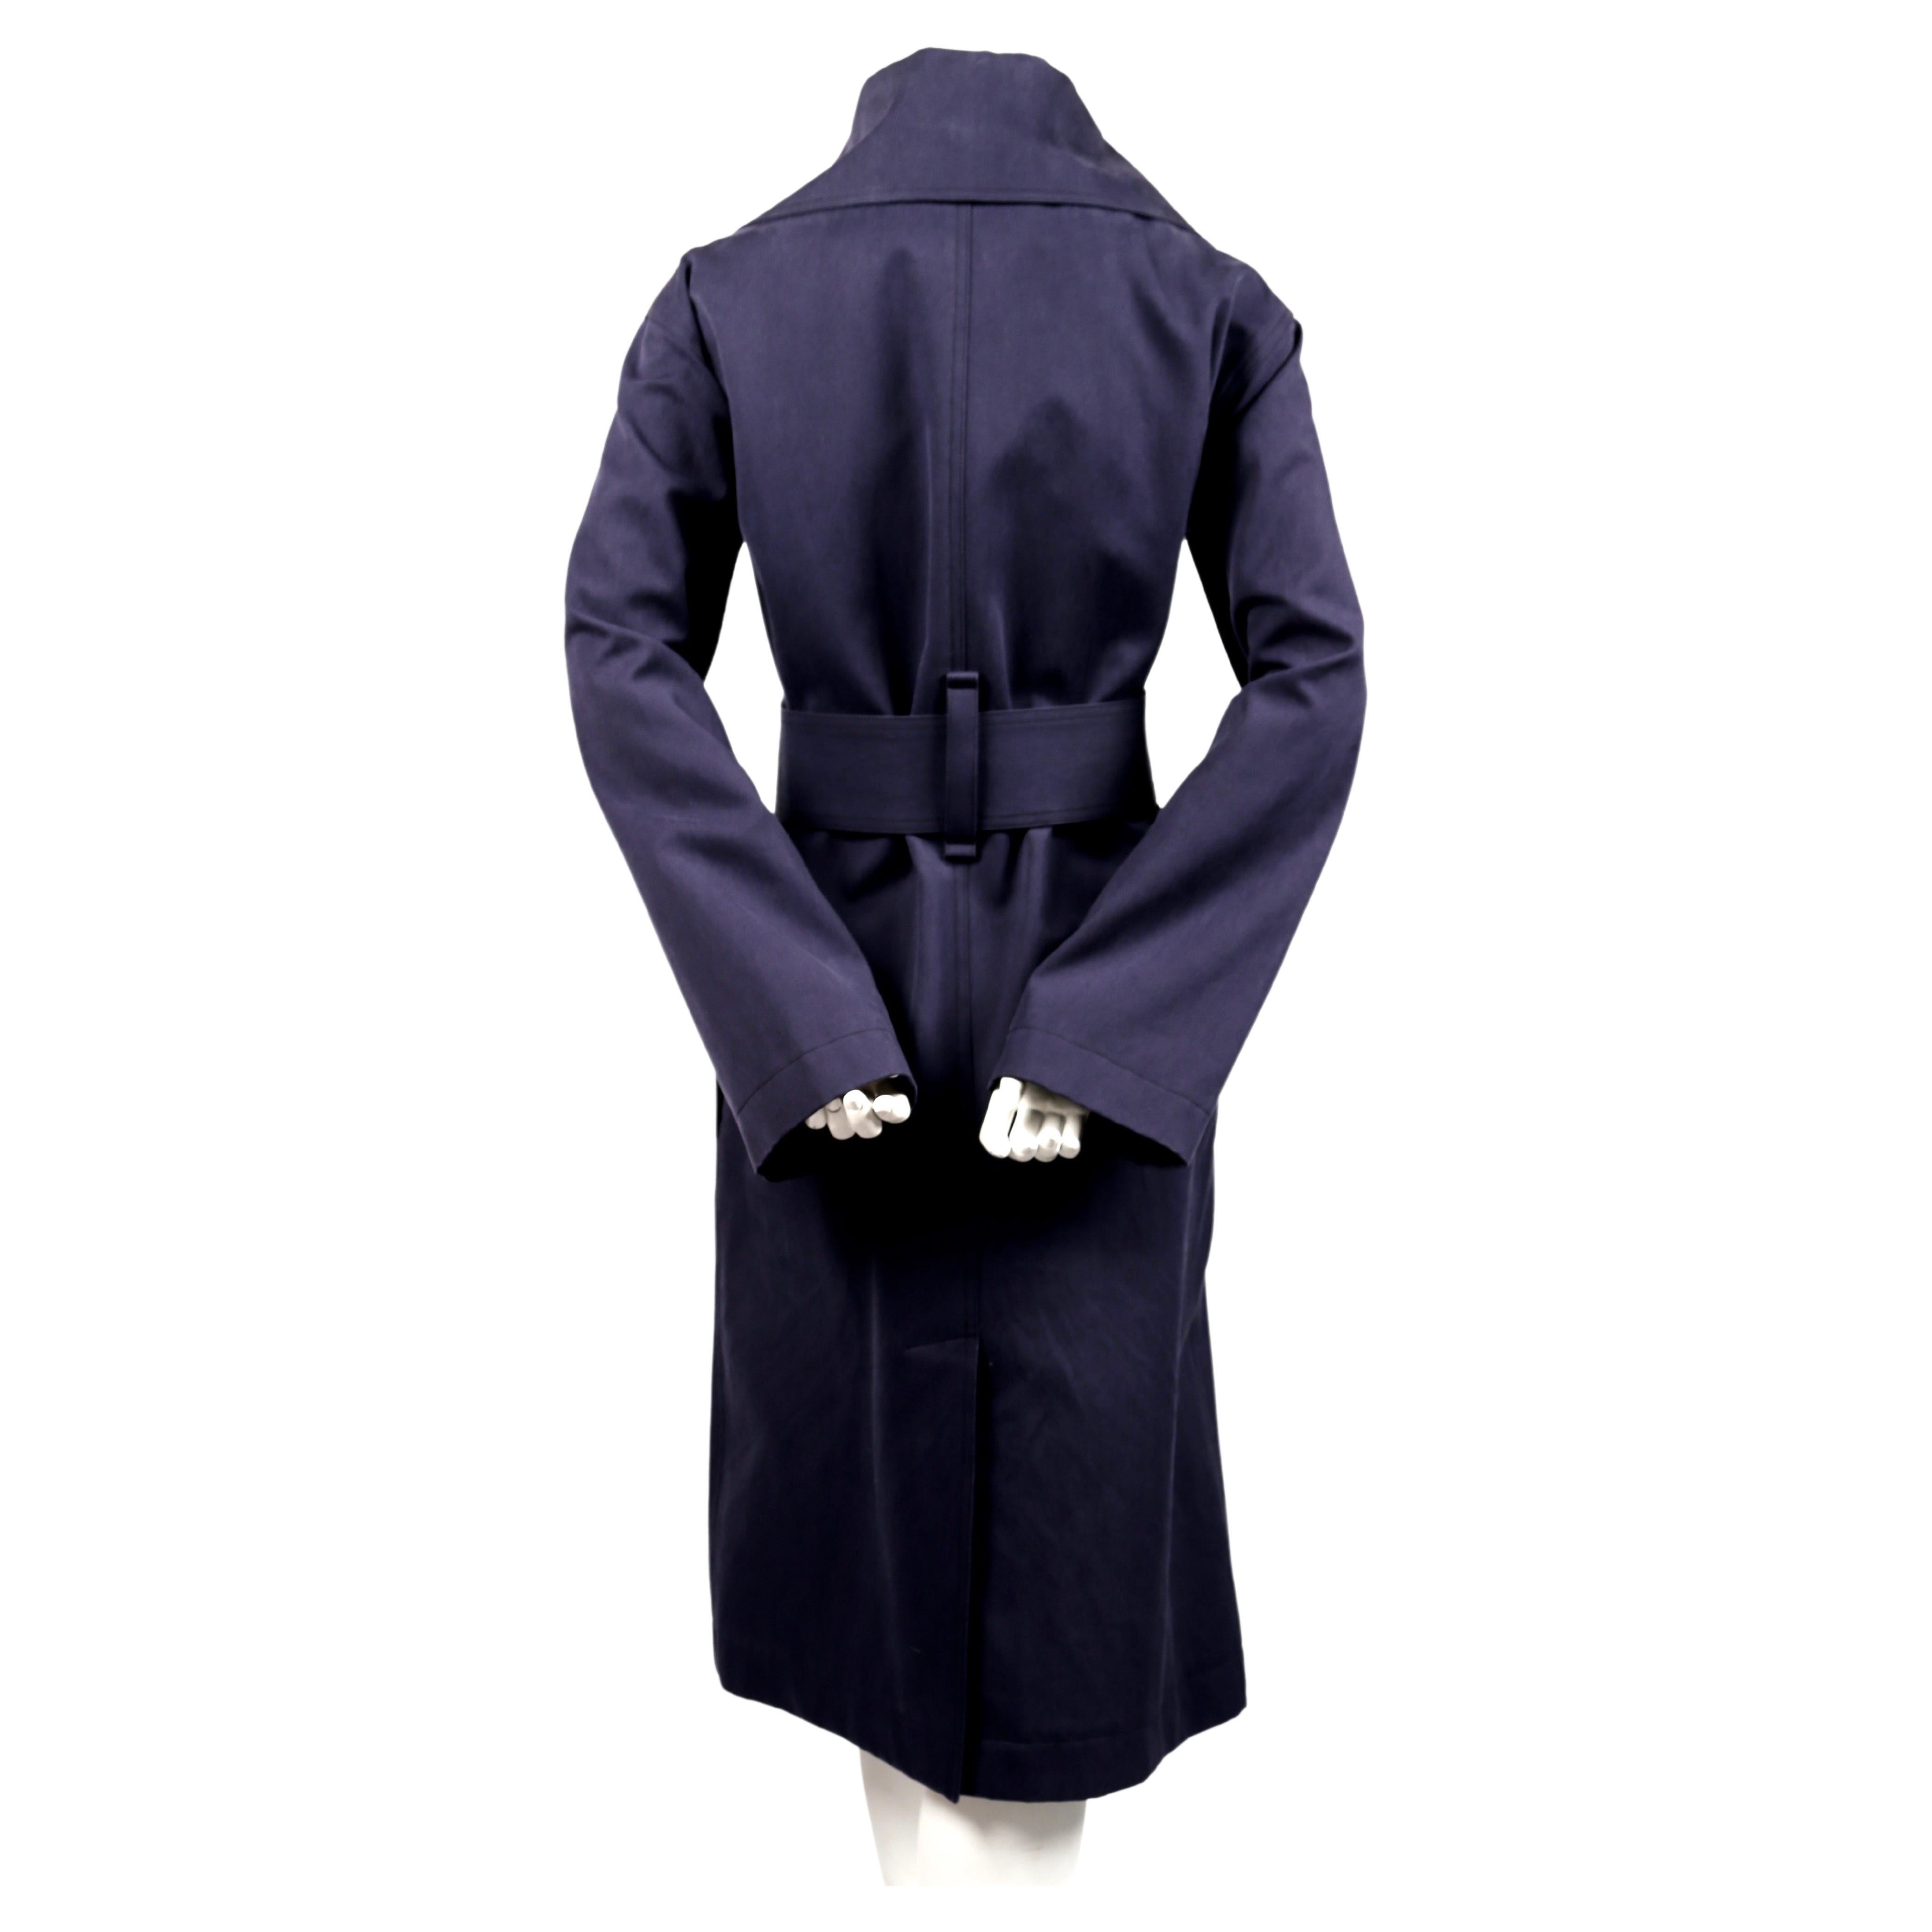 CELINE by PHOEBE PHILO navy blue brushed cotton trench coat For Sale 2